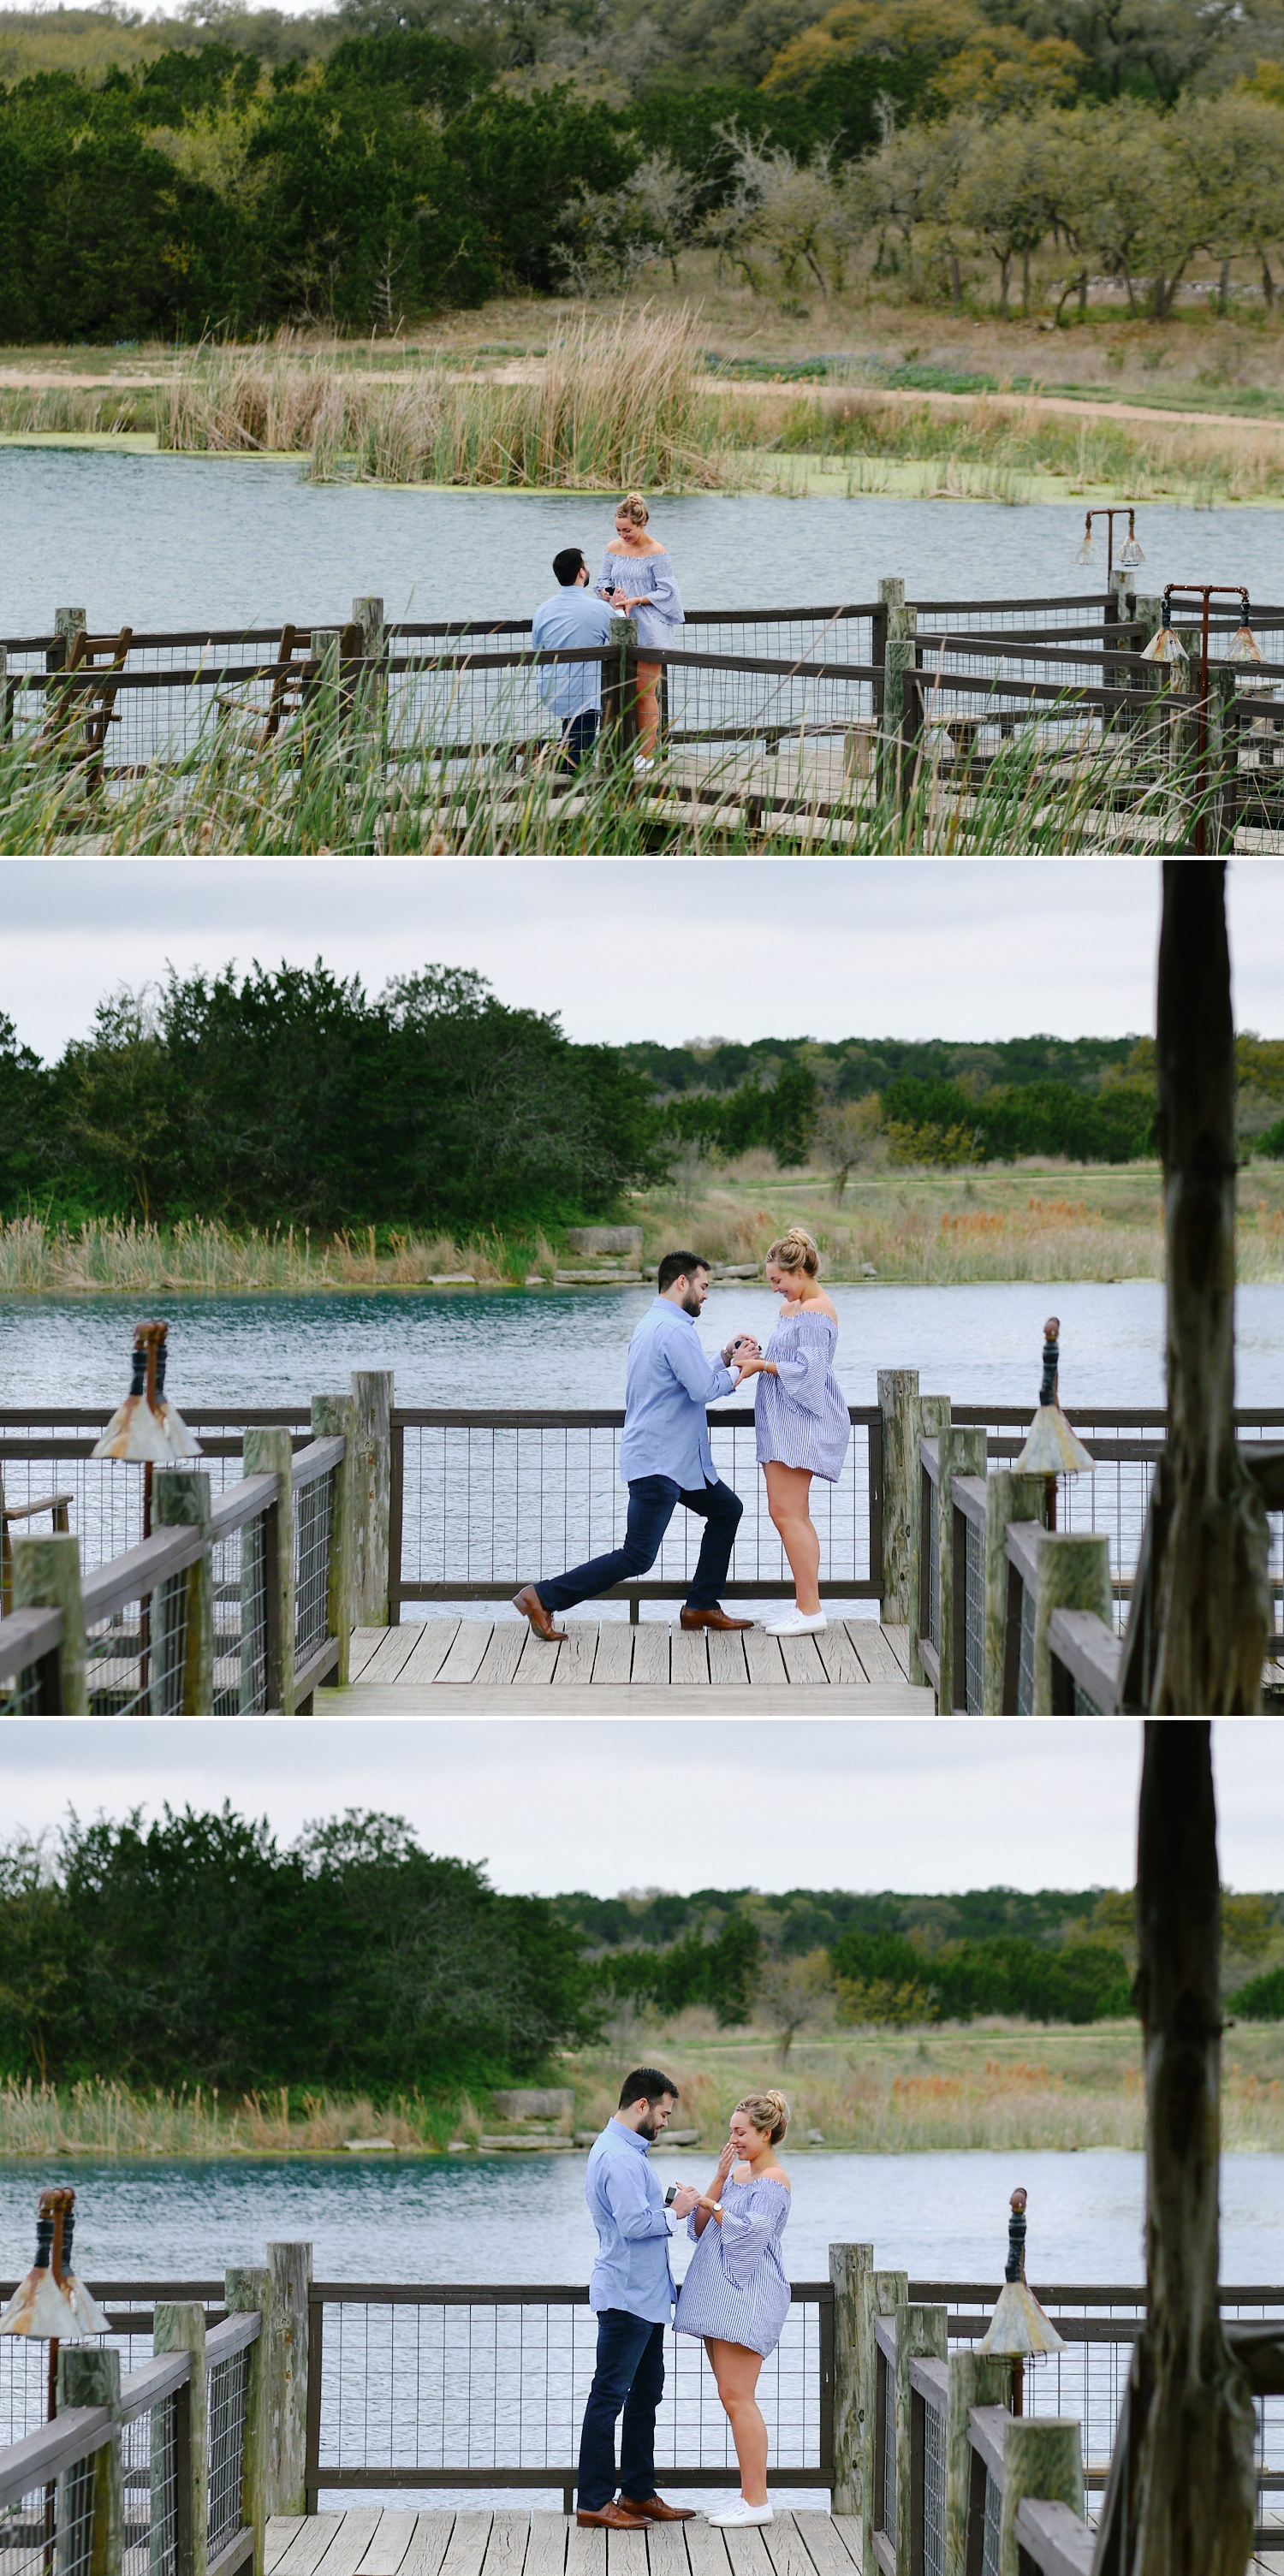 Bret proposes to Katy on the docks at a private park in Bee Caves, TX captured by Austin proposal photographer Mercedes Morgan Photography